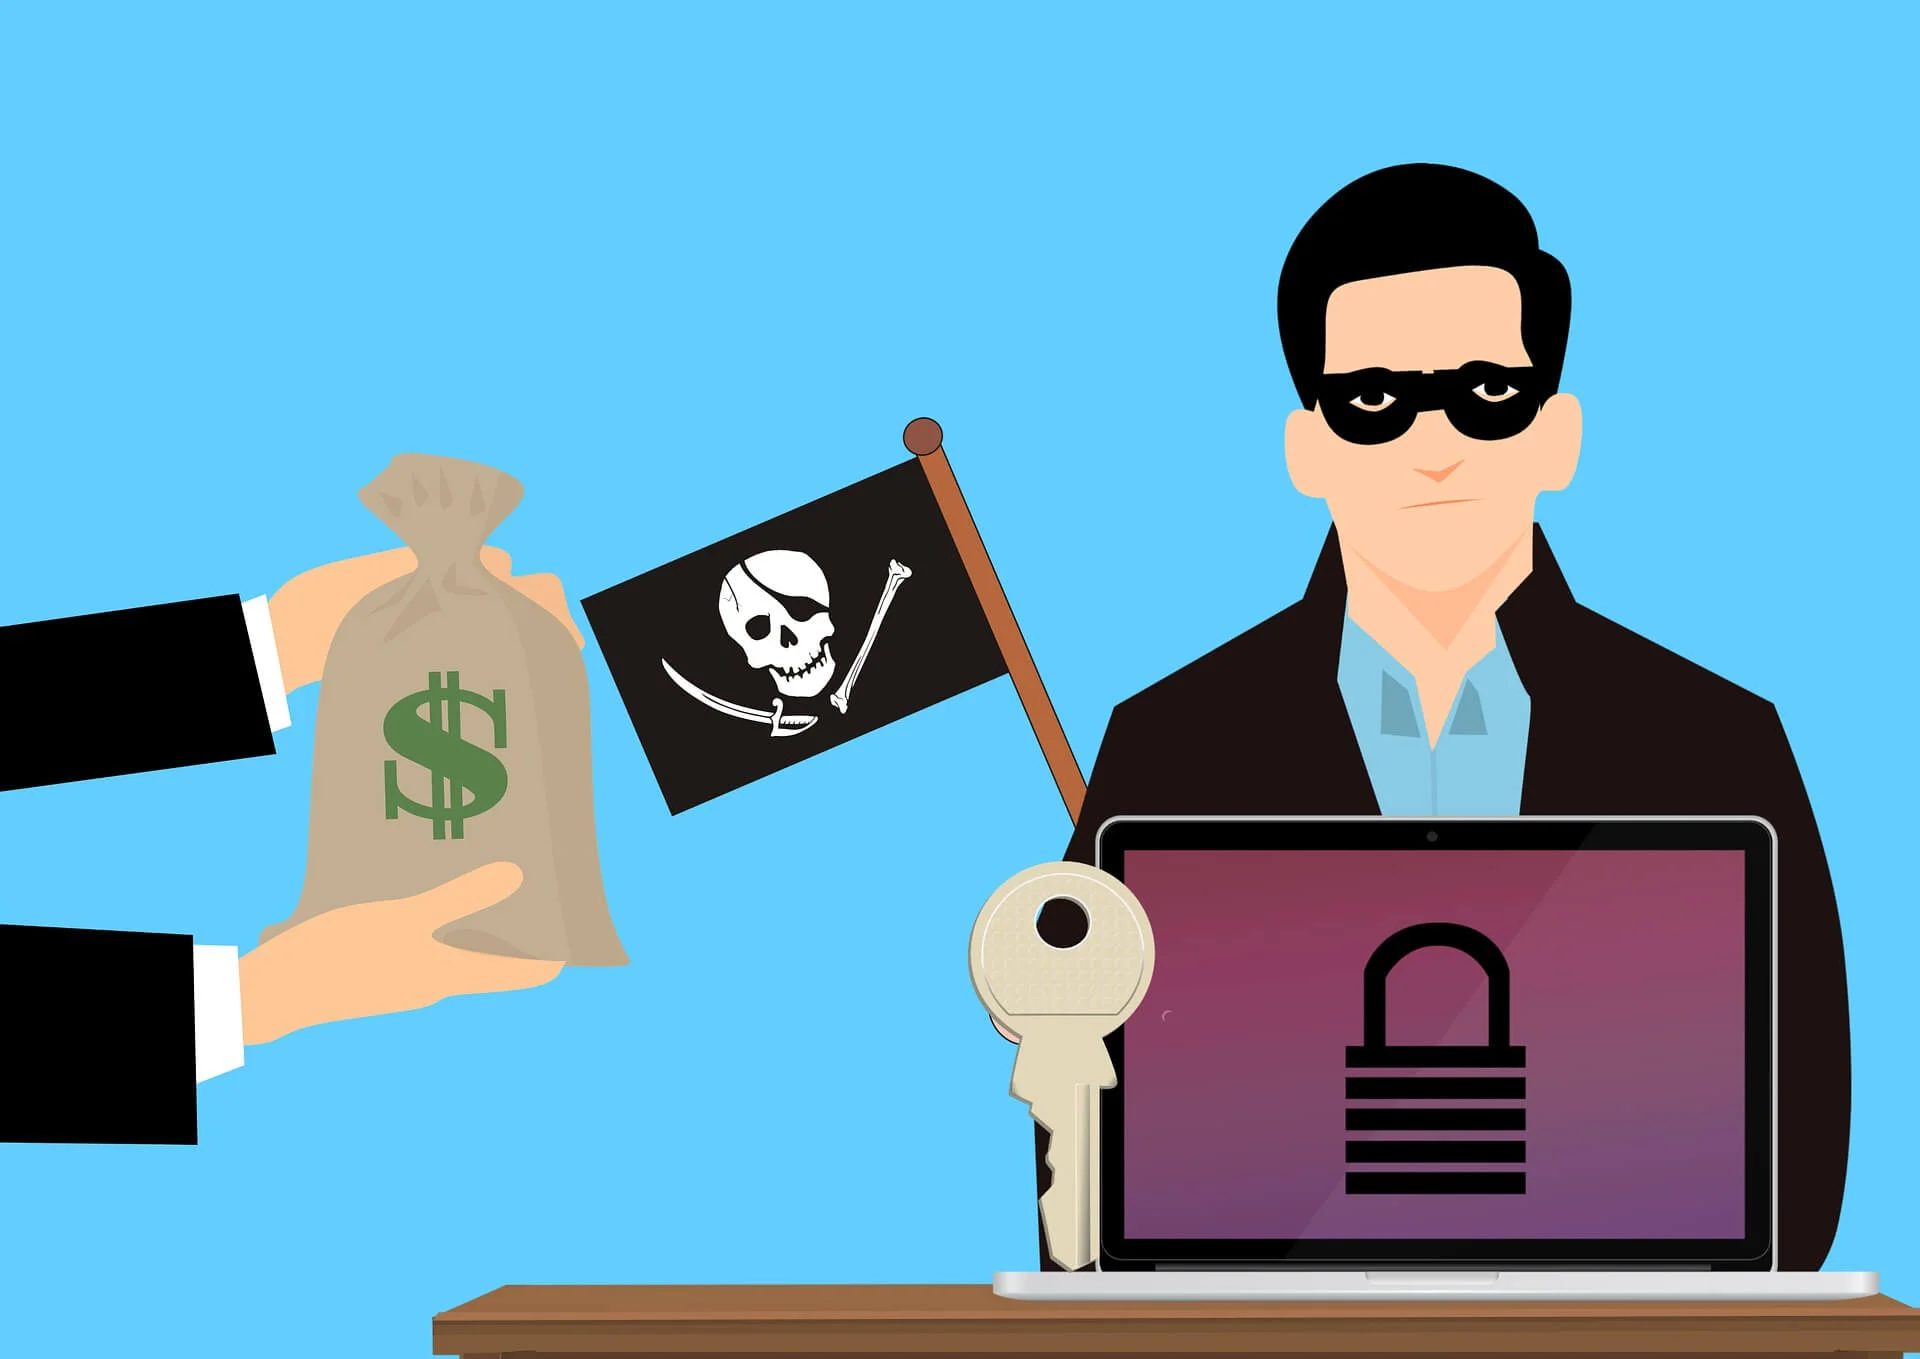 Ransomware Threats Are Those That Prevent Access to Your Files to Force to Pay Ransom